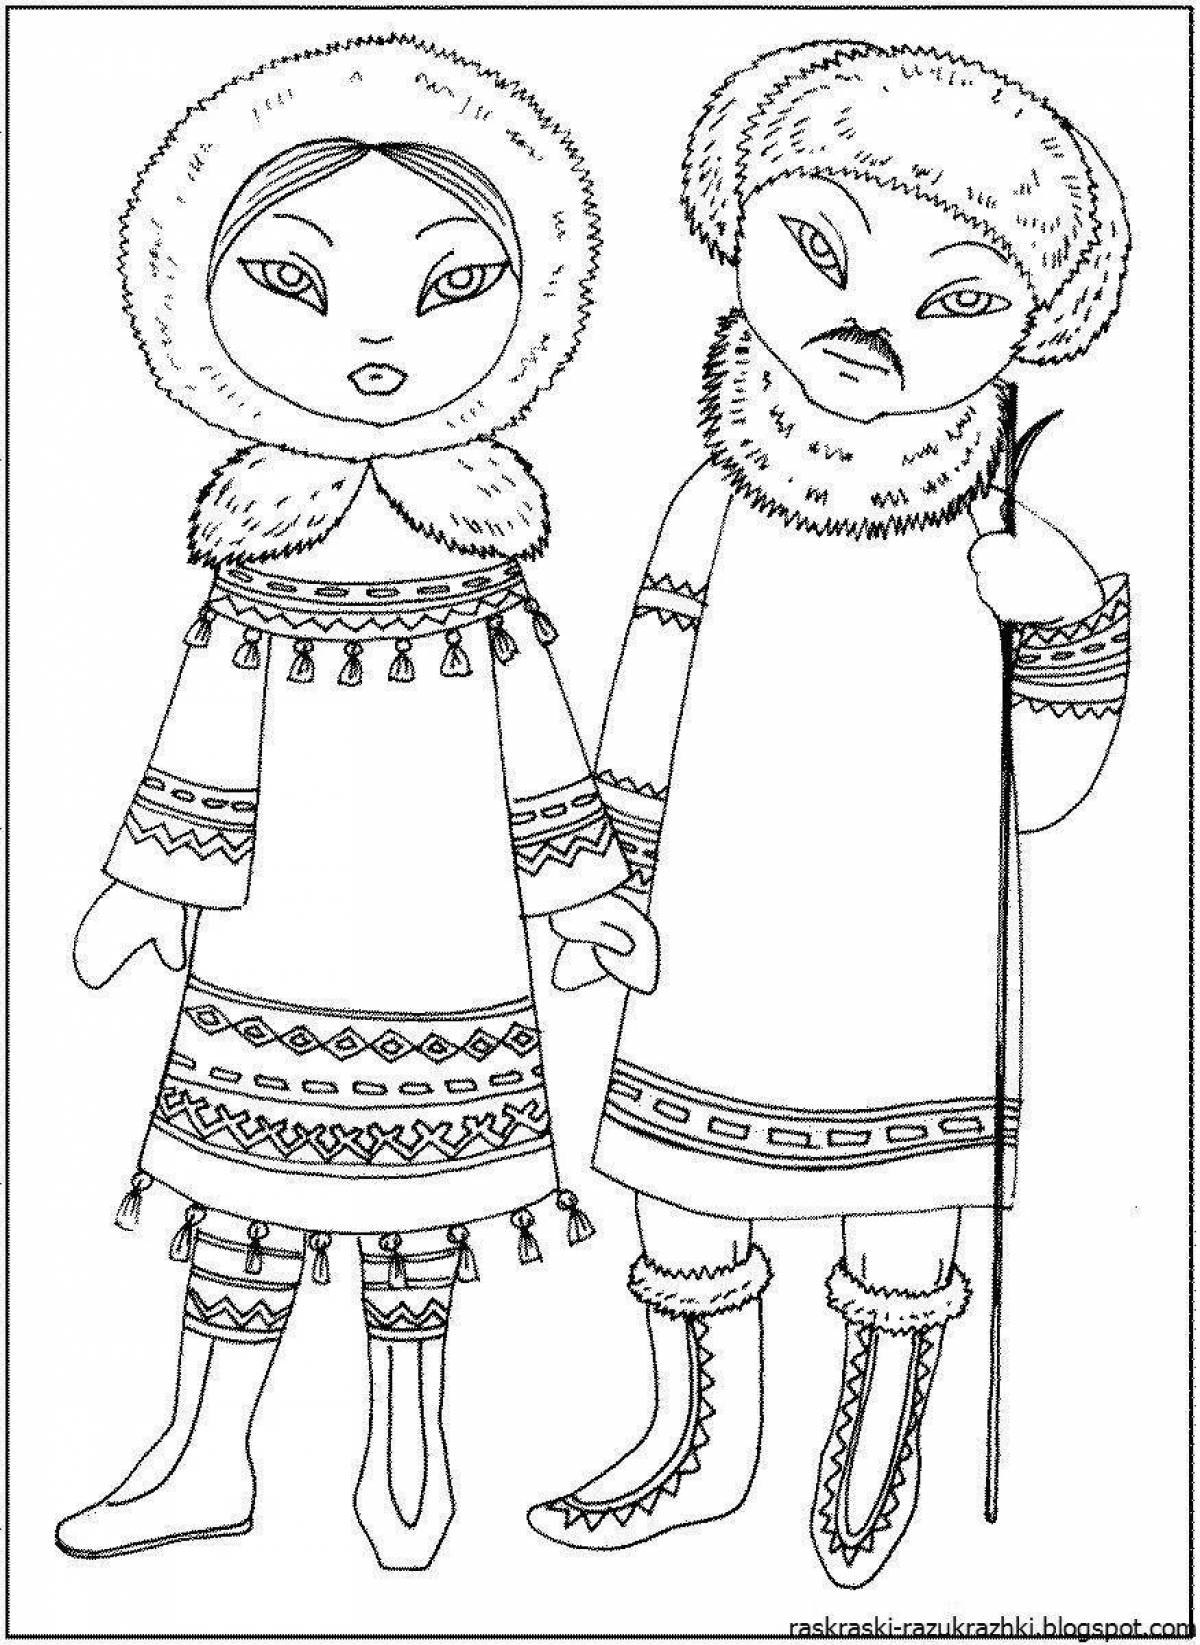 A fun coloring book for children from the north